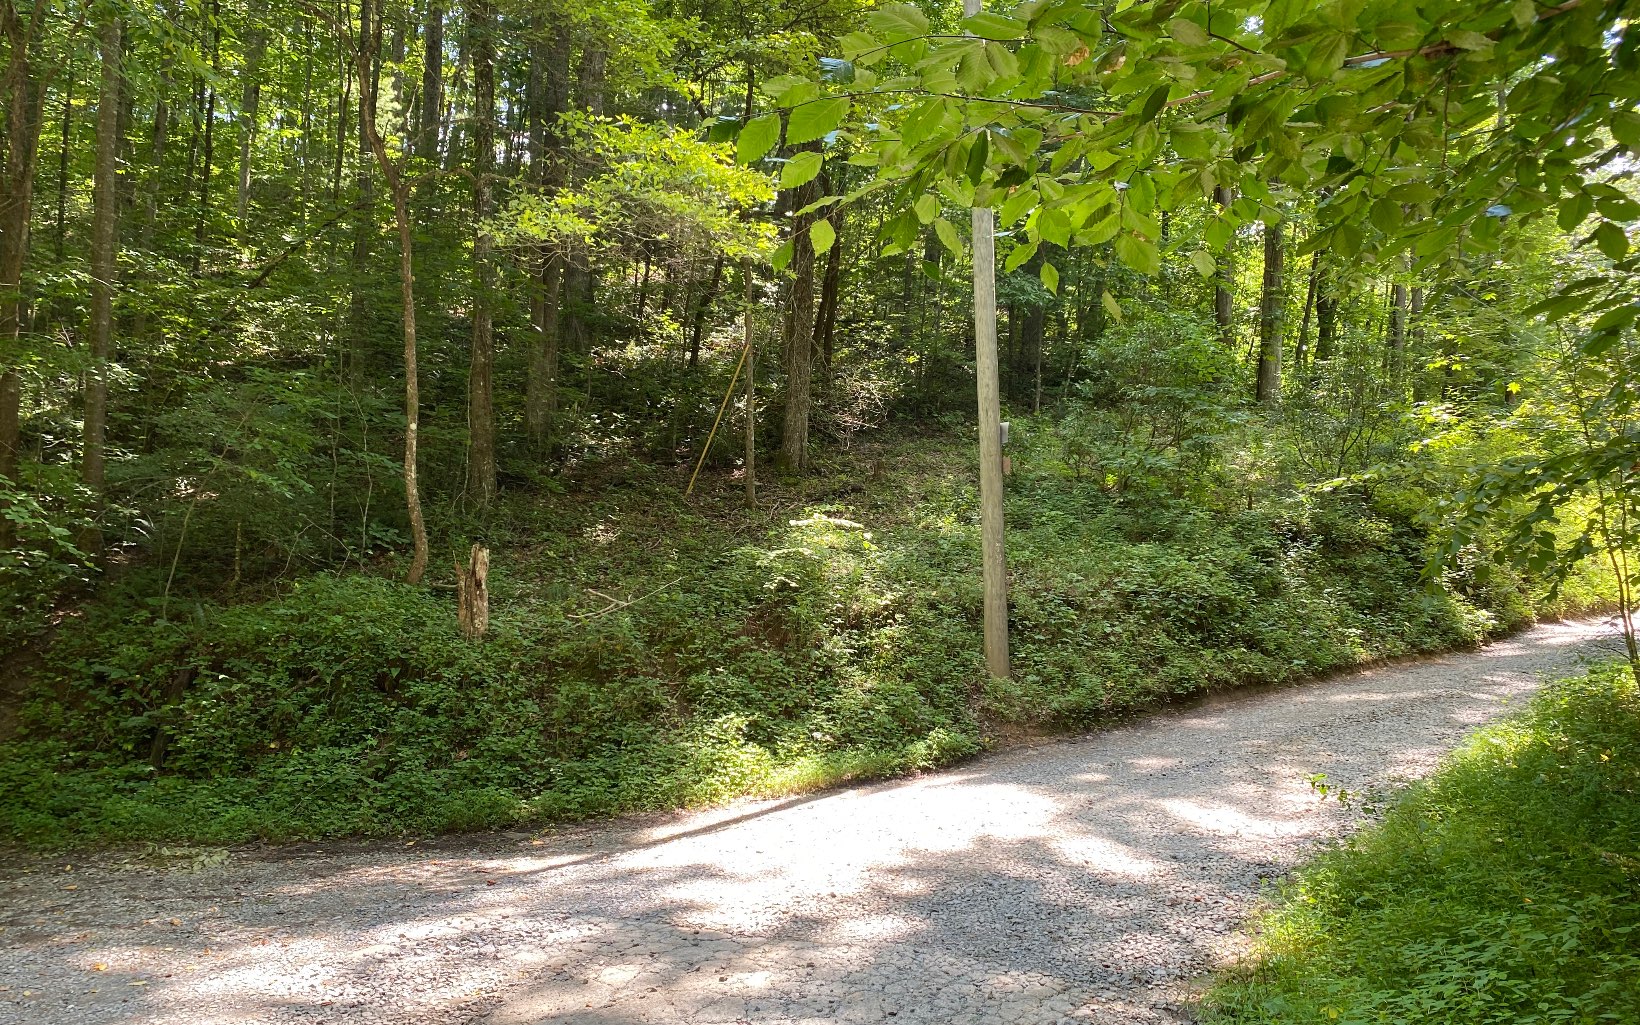 Unrestricted Mountain Acreage - 4.79 Acres located in Beautiful Ellijay, Georgia. This Acreage Features a Meandering Branch Along Property Line, Private Location and Electric To Property Line. Priced To Sell!!